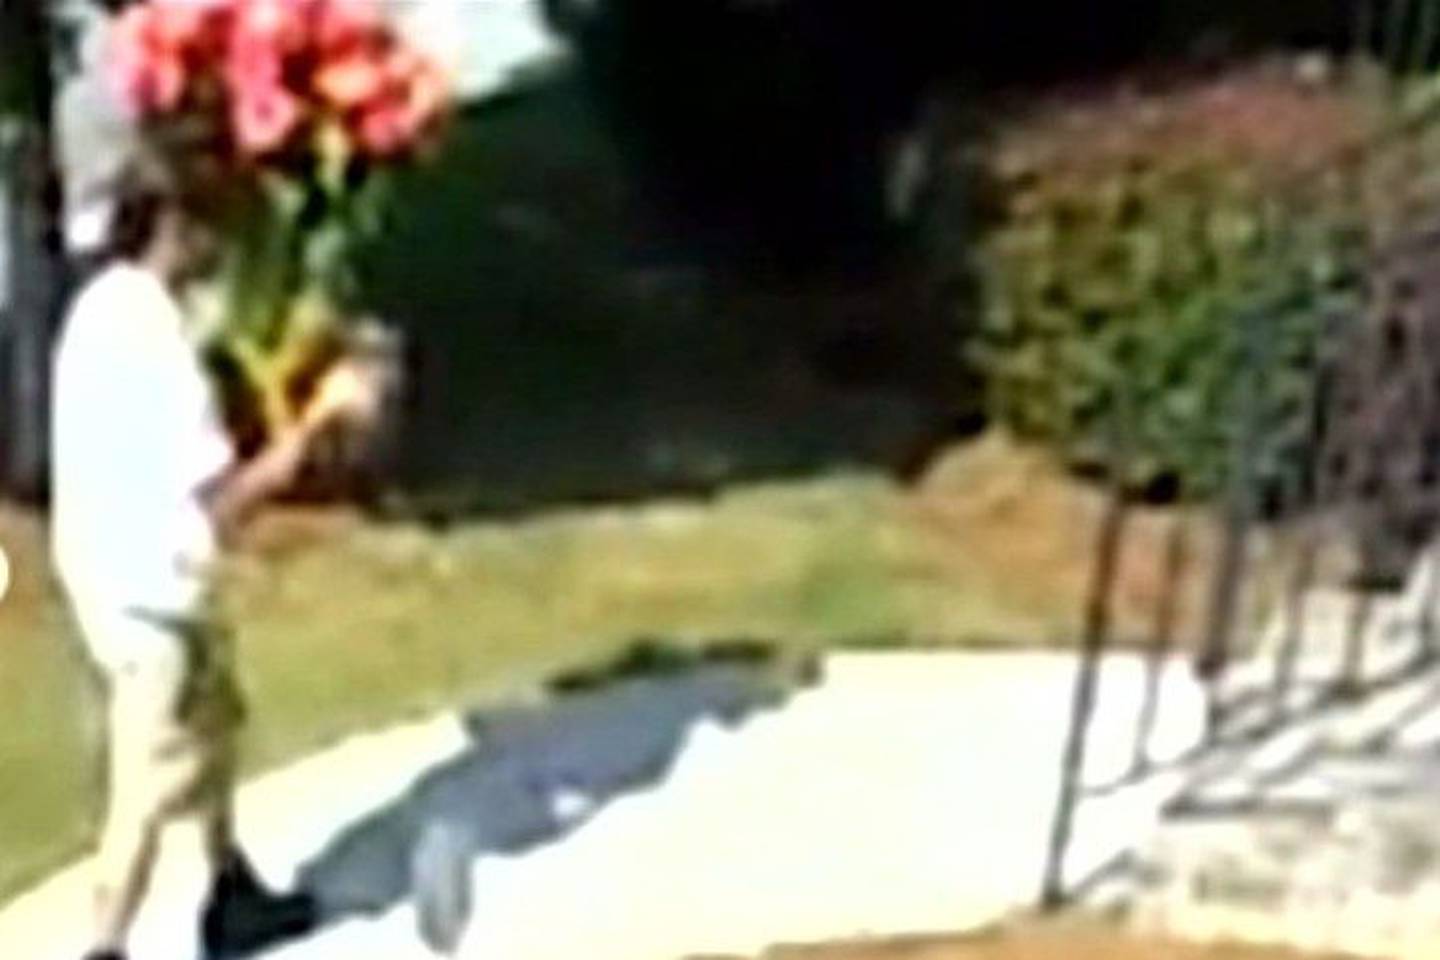 Woman says fake flower deliveryman attacked her